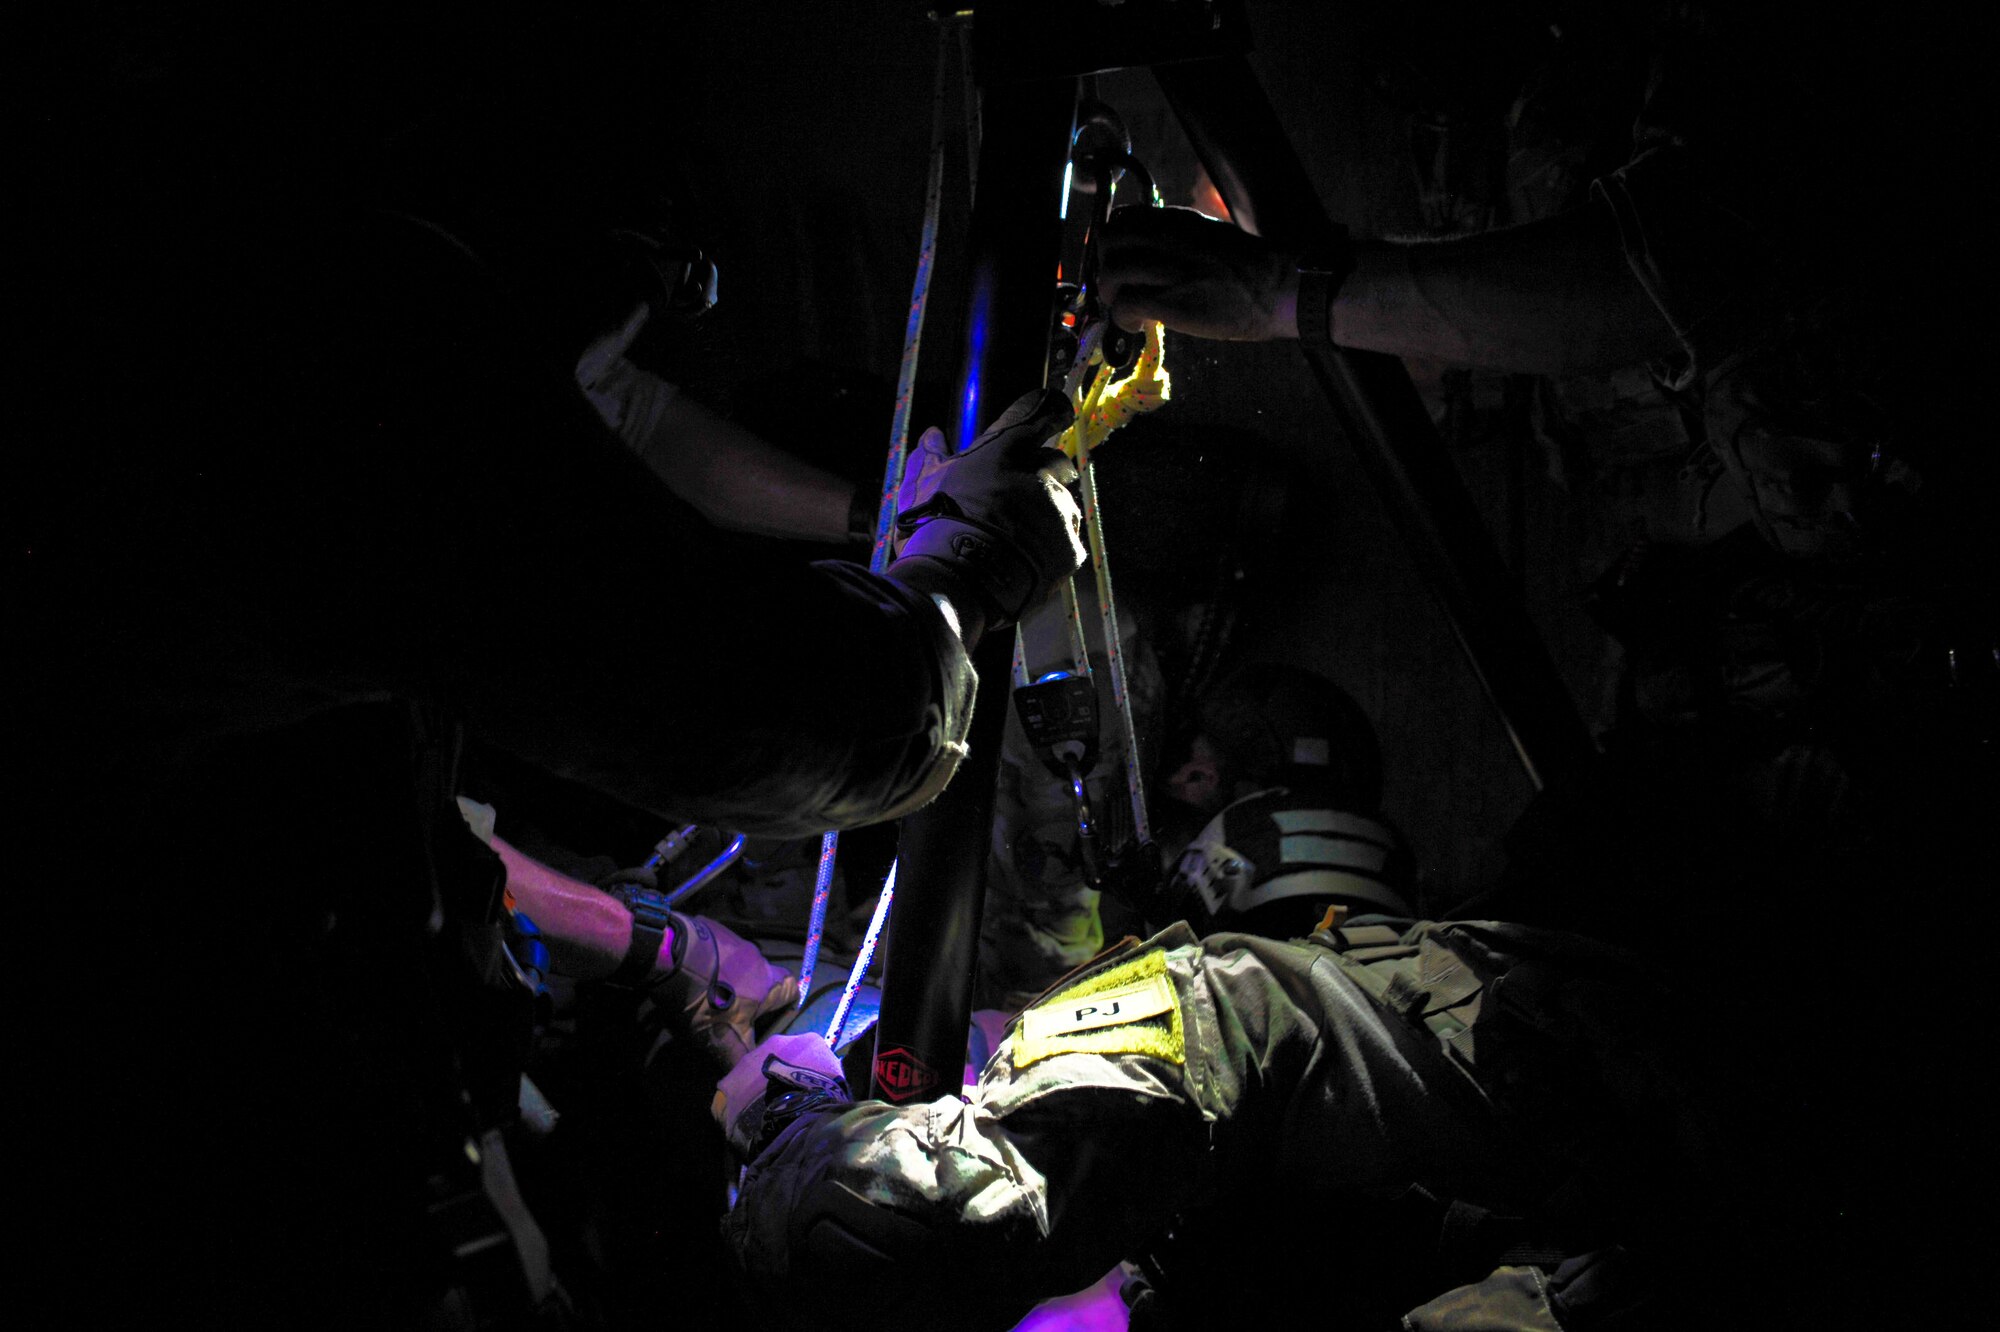 Pararescuemen from the 48th Rescue Squadron use a tripod rescue system to lower and extract casualties and rescuers during training at the Titan Missile Museum, Green Valley, Ariz., April 17, 2014.  The tripod is used to enter confined spaces when an overhead anchor is not available.  (U.S. Air Force Photo by Airman 1st Class Chris Massey/Released)